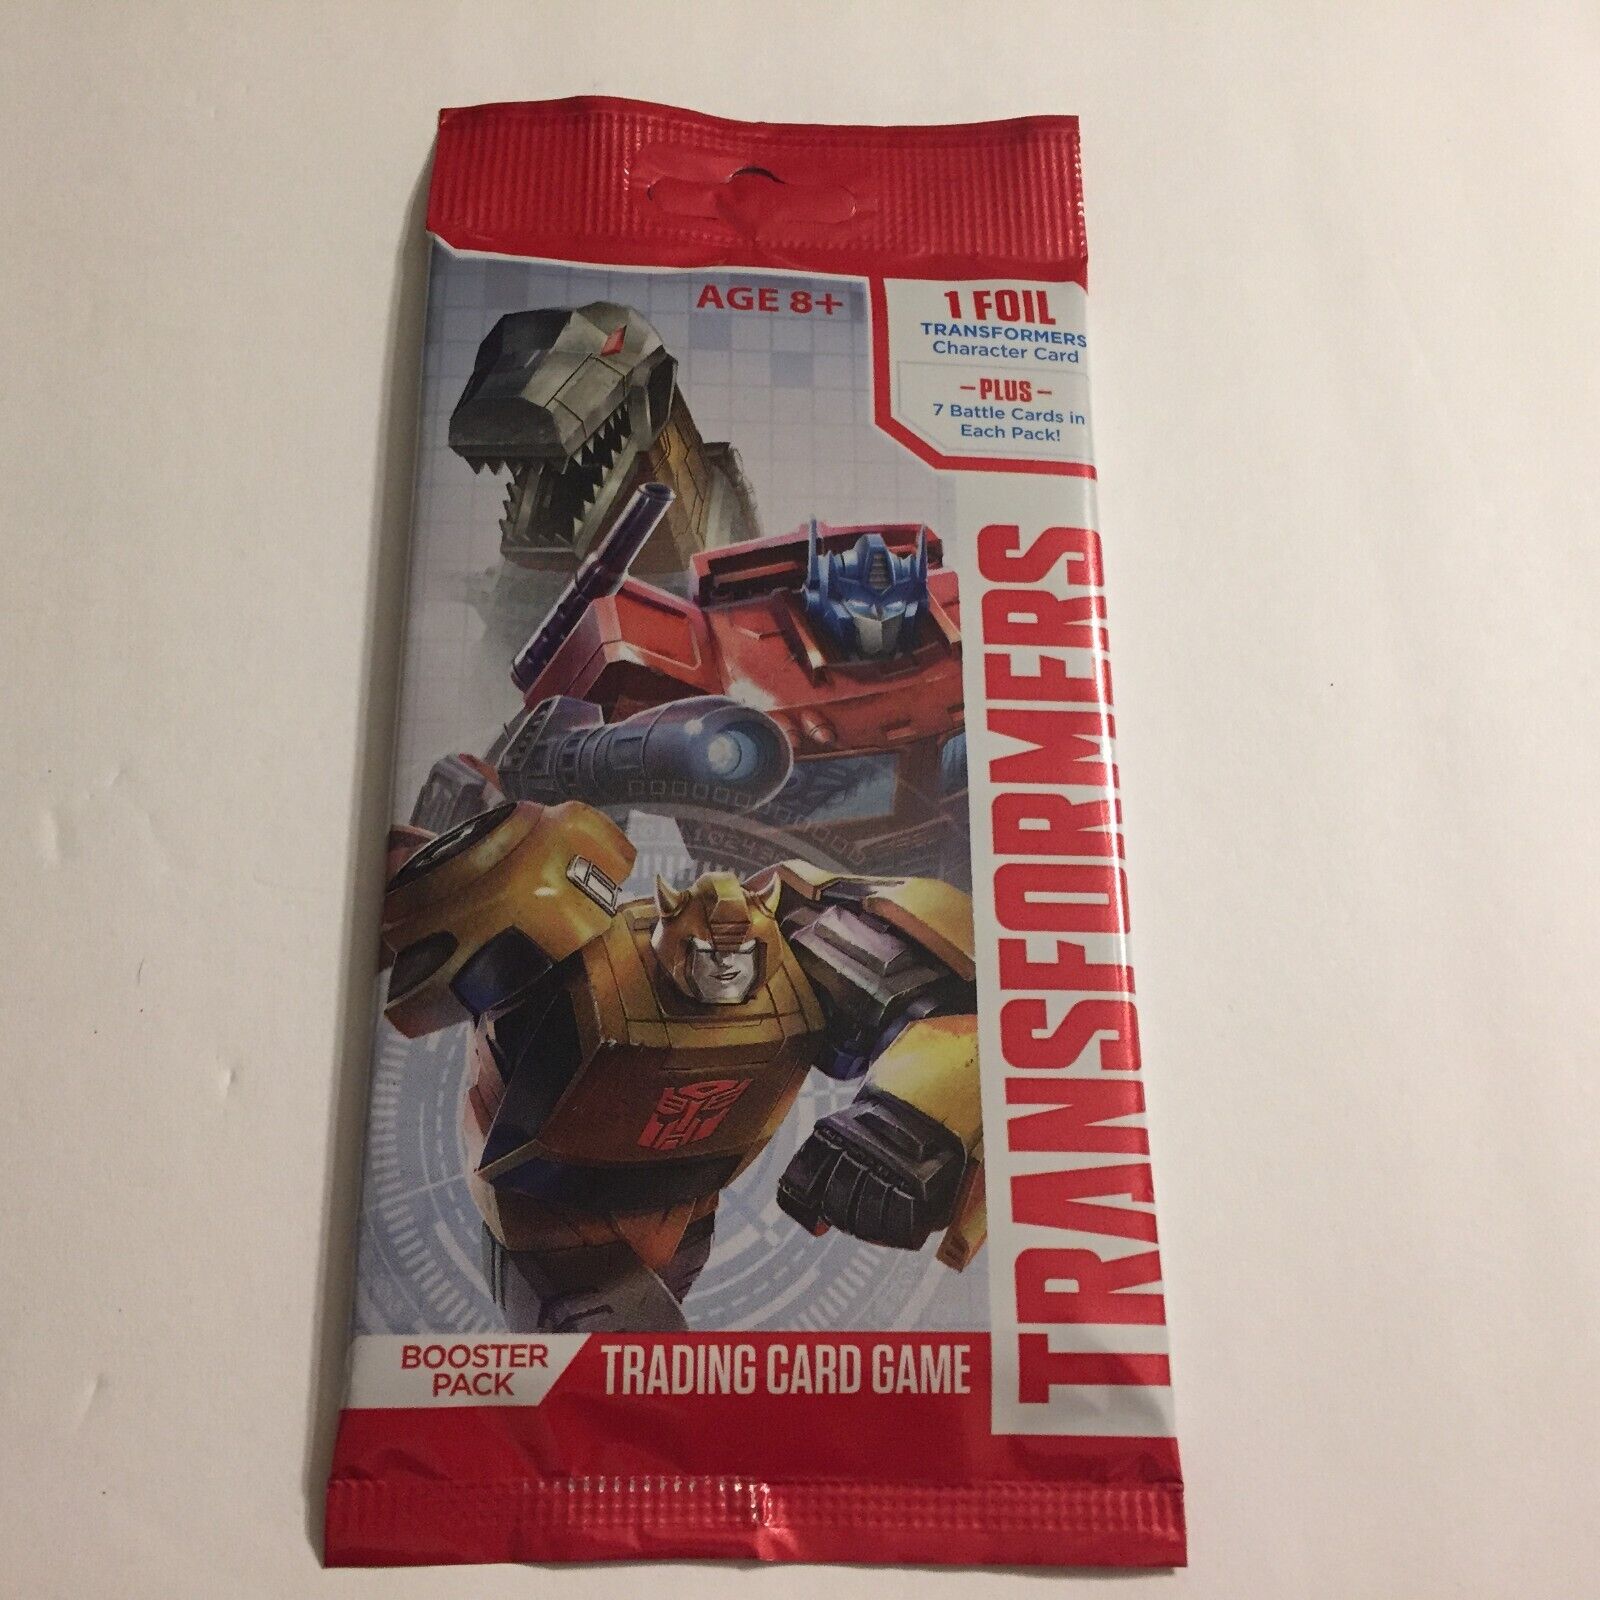 NEW Transformers Trading Card Game Booster